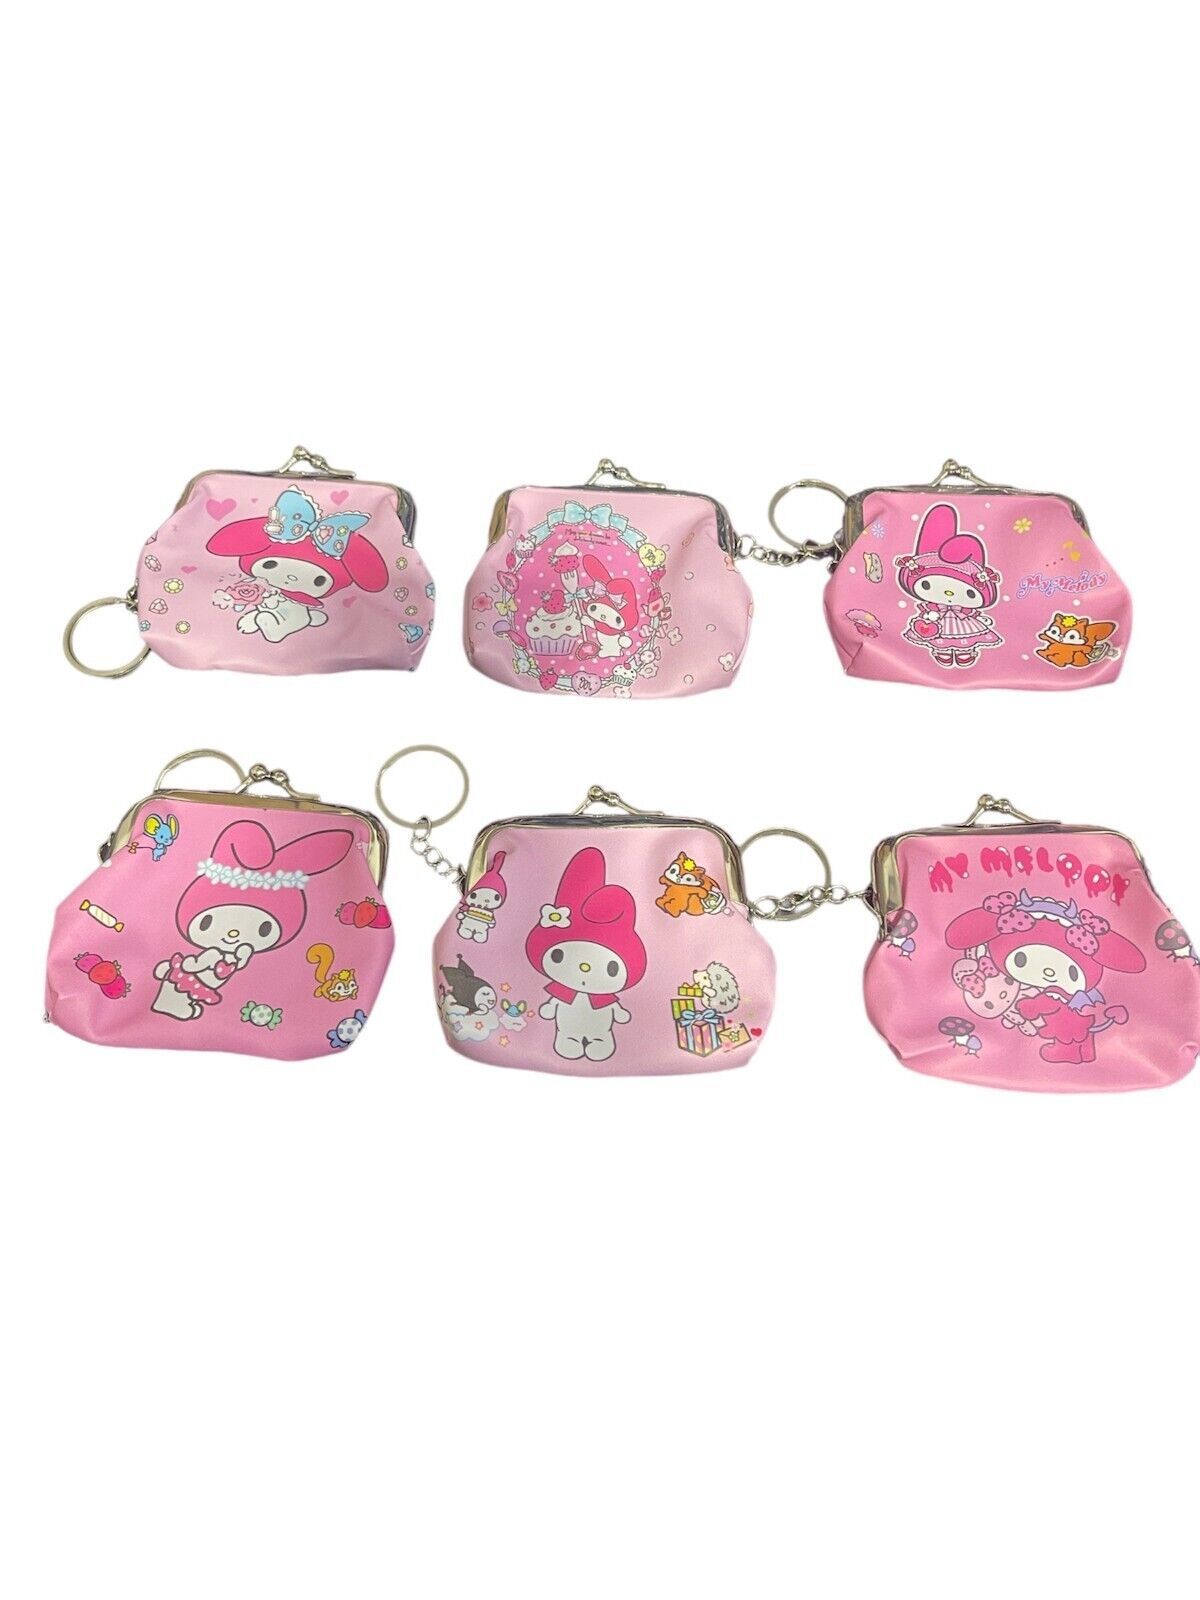 Primary image for My Melody Coin Purse - Coin Bag - With Keyring - Random Style - Keychain